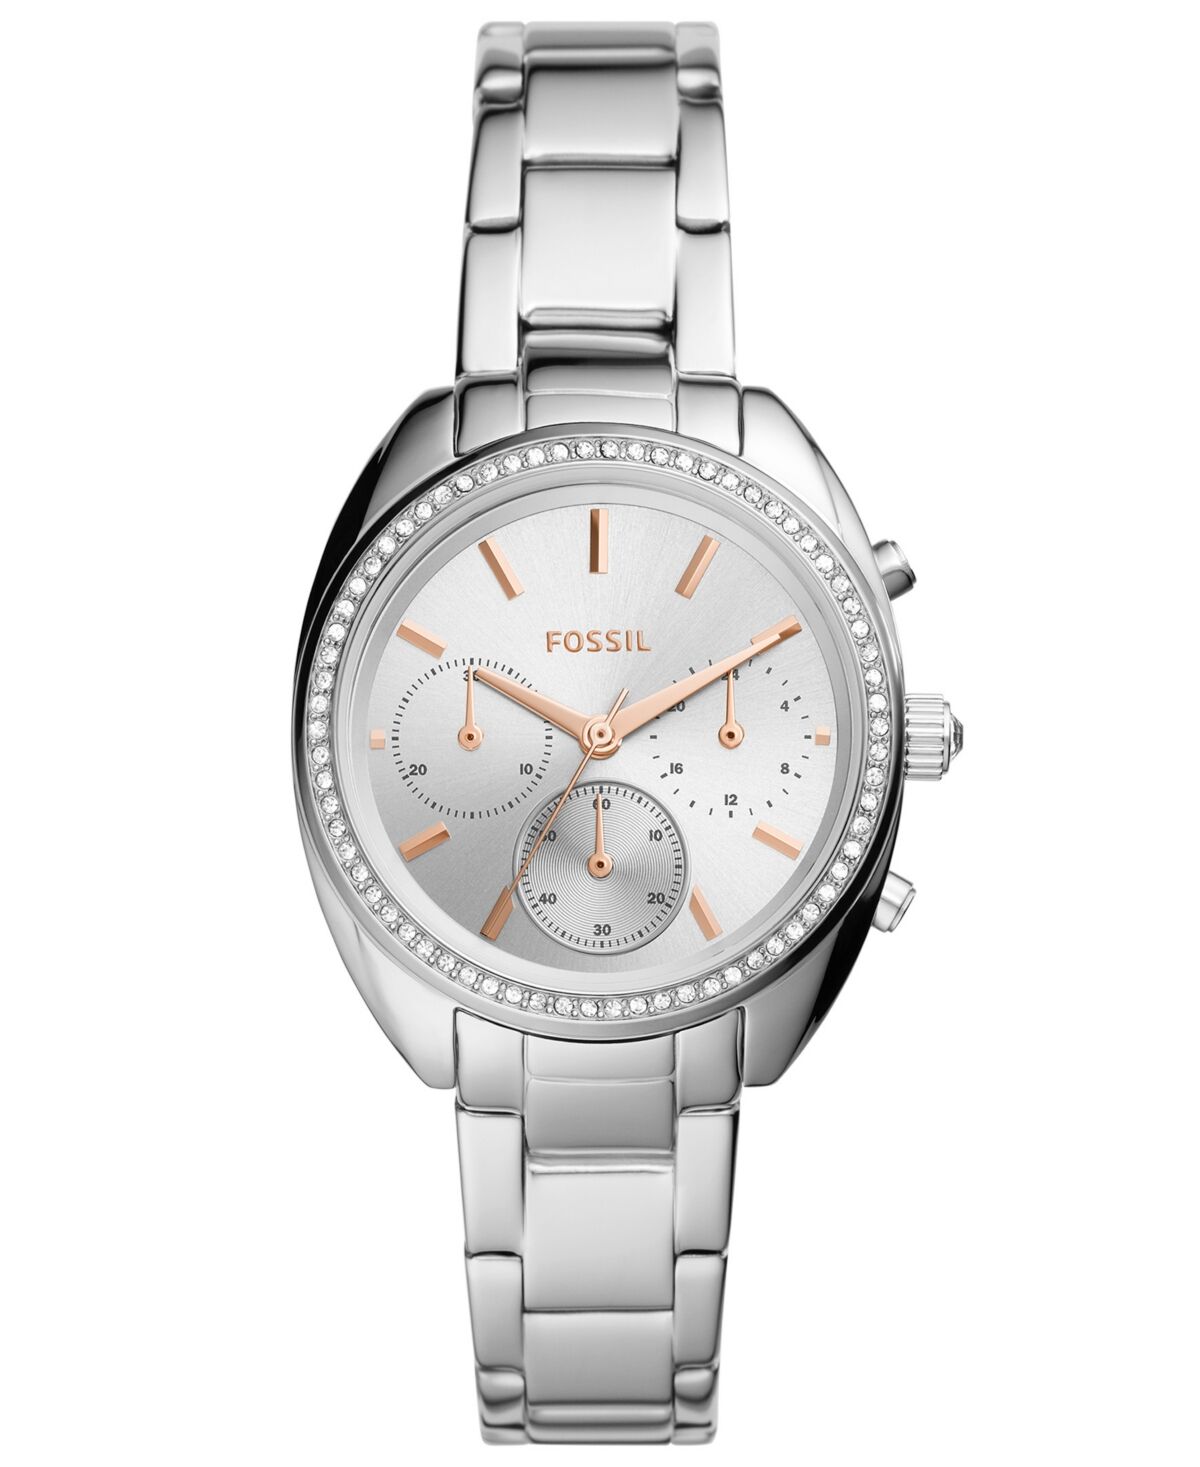 Fossil Ladies Vale Chronograph, stainless steel watch 34mm - Silver